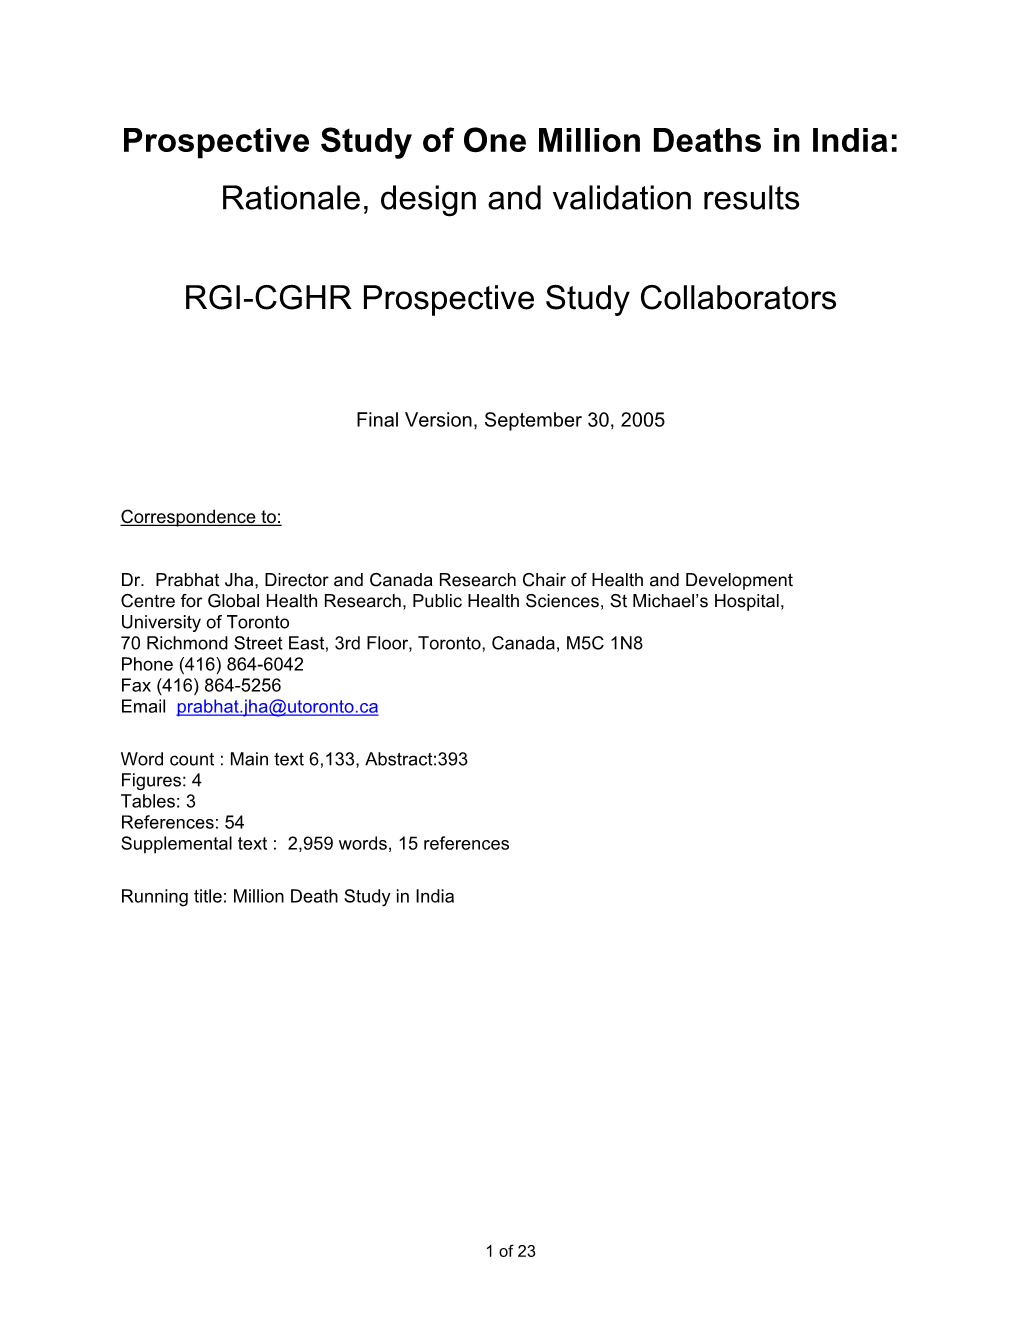 Prospective Study of One Million Deaths in India: Rationale, Design and Validation Results